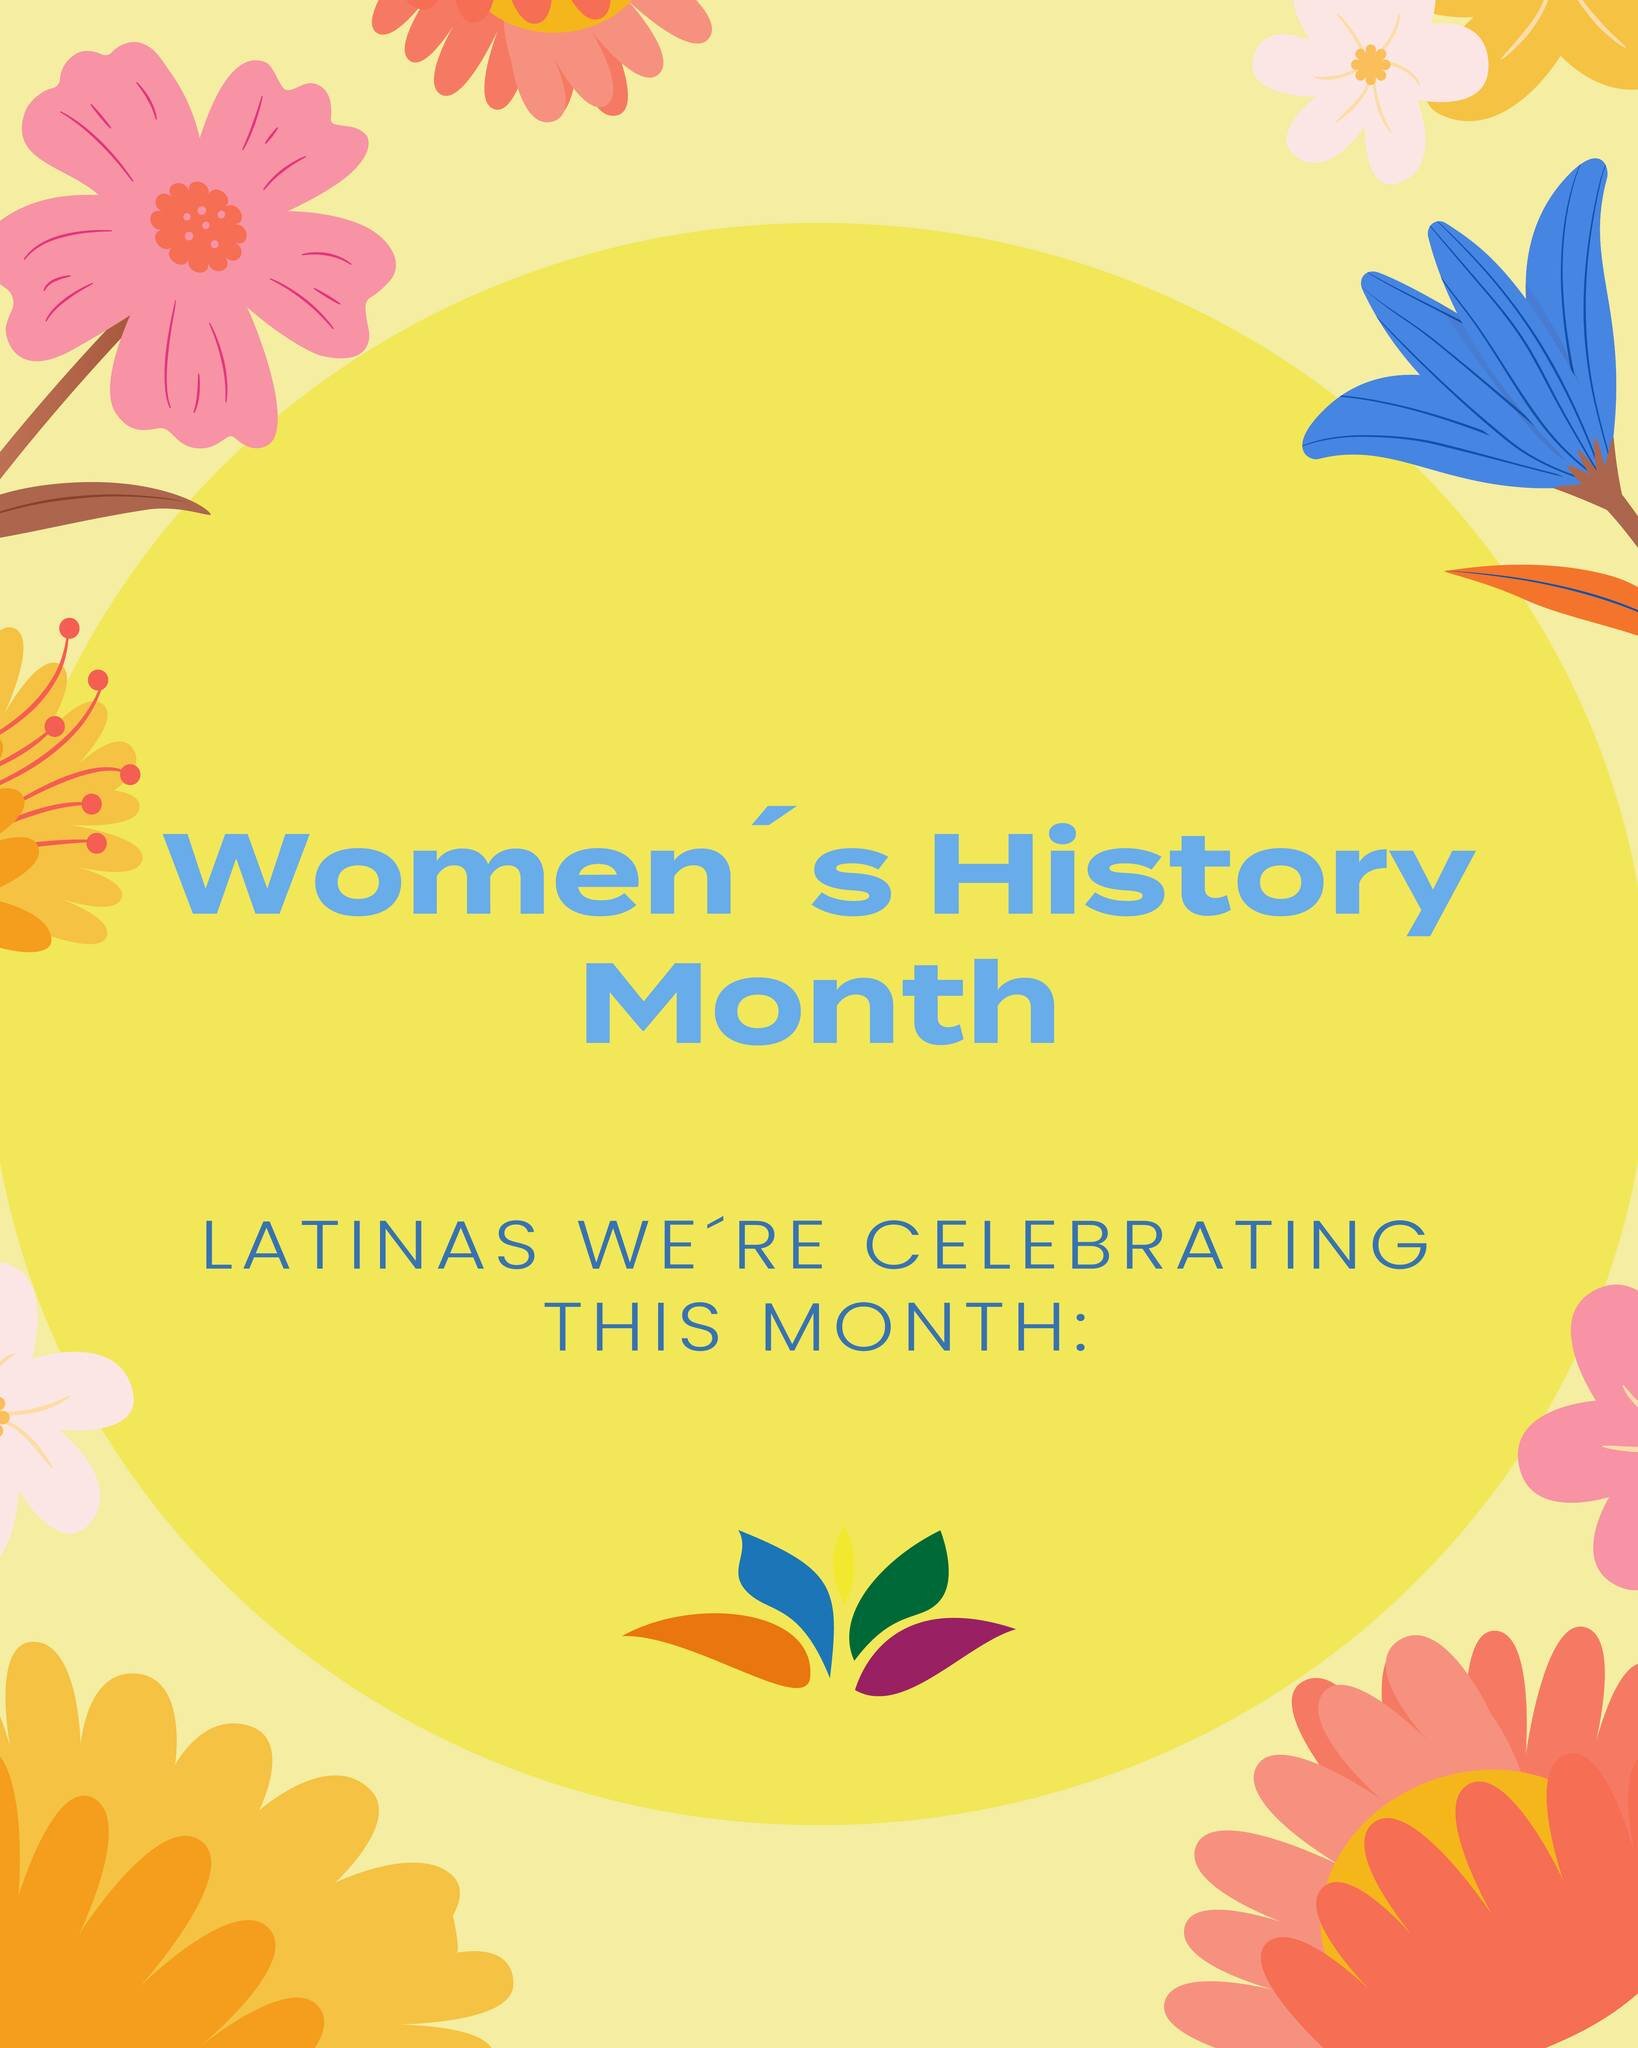 Today on International Women's Day, we celebrate the Latina women who are making waves. 💪🌎 Their stories of strength, determination, and leadership inspire generations. Together, we forge ahead towards a more equal and empowered world! #Internation